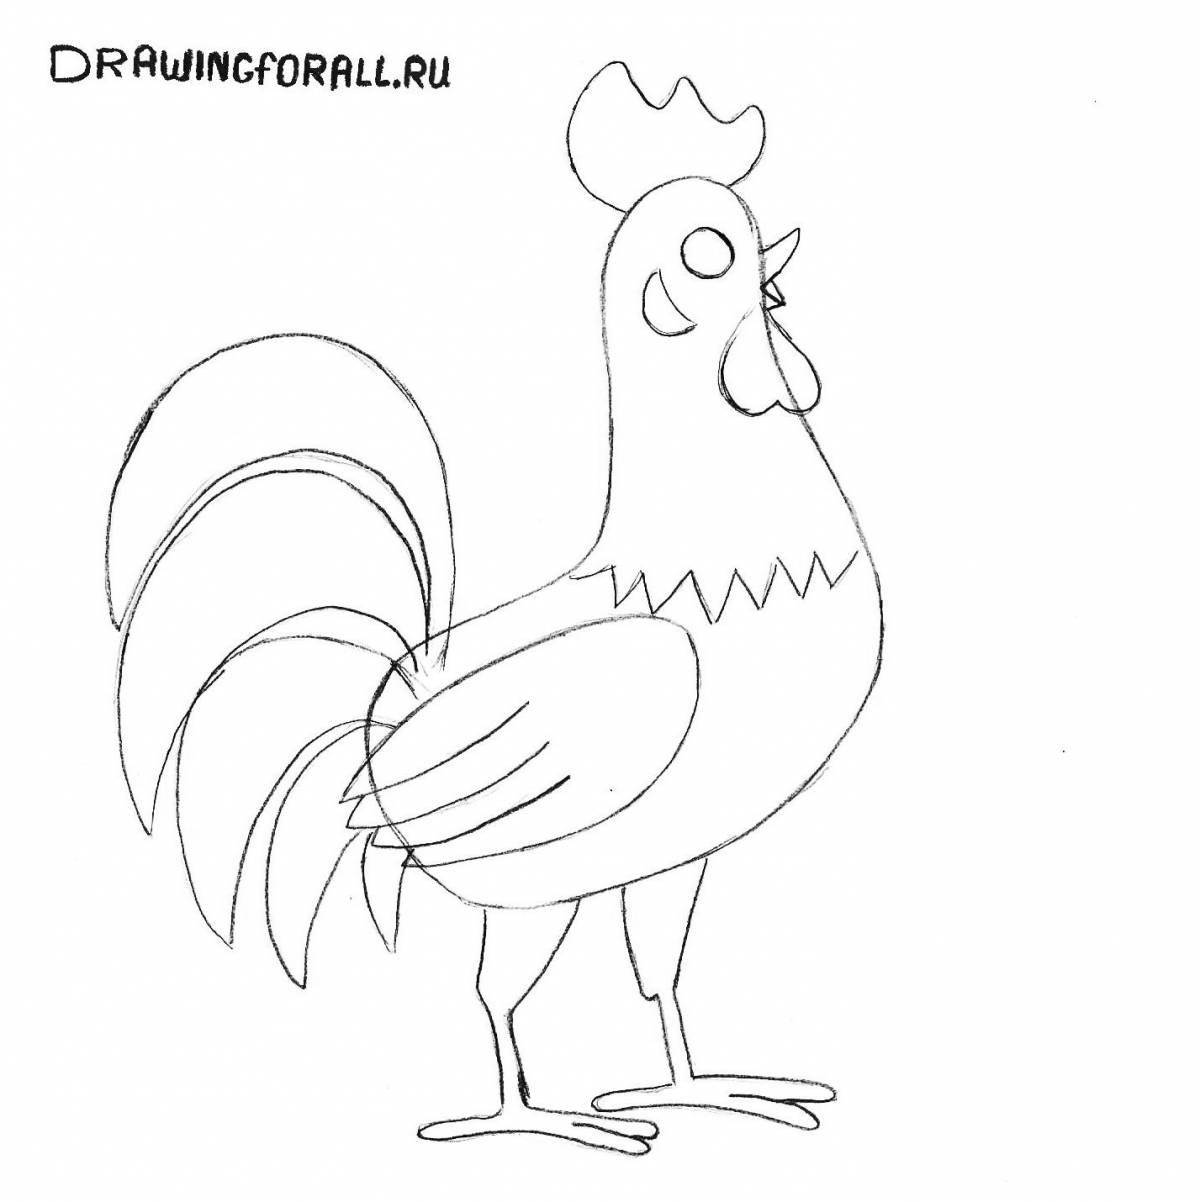 Fun rooster coloring for kids